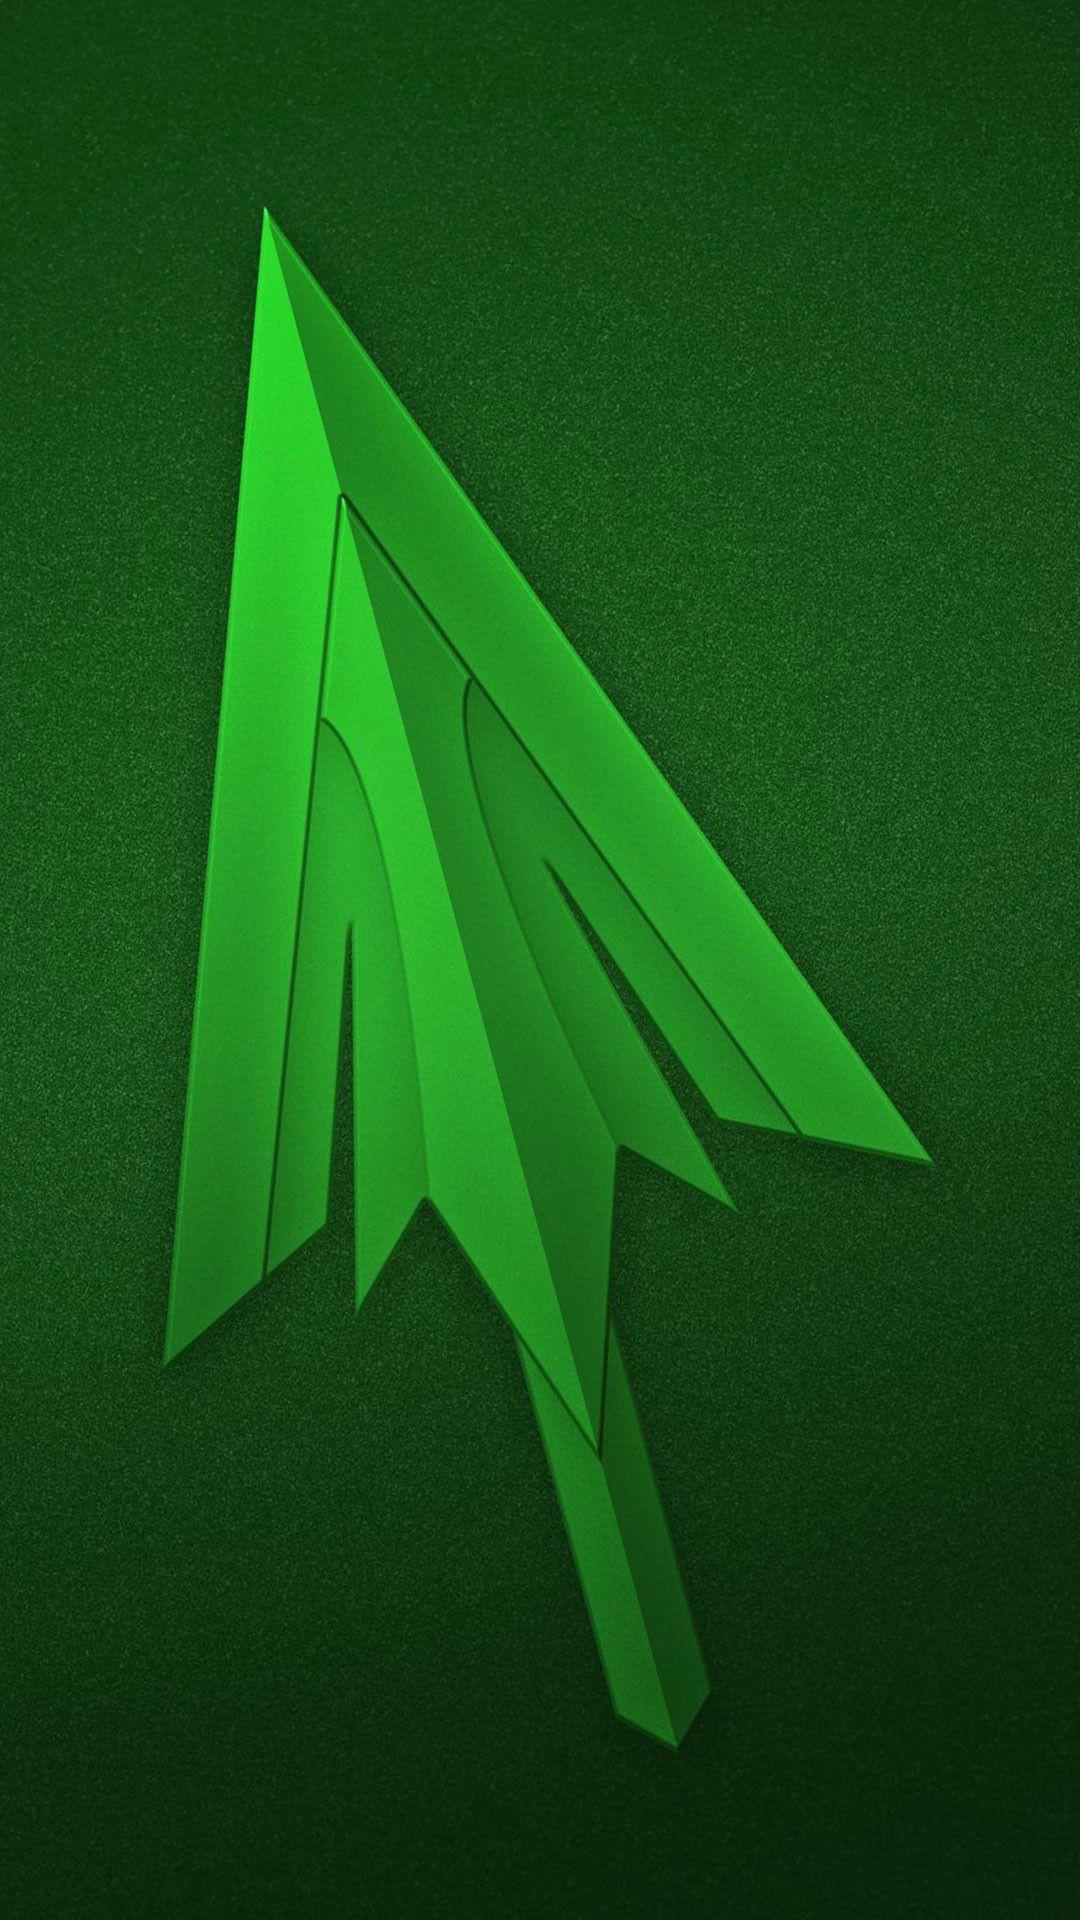 Download Free Arrow Wallpaper for Android